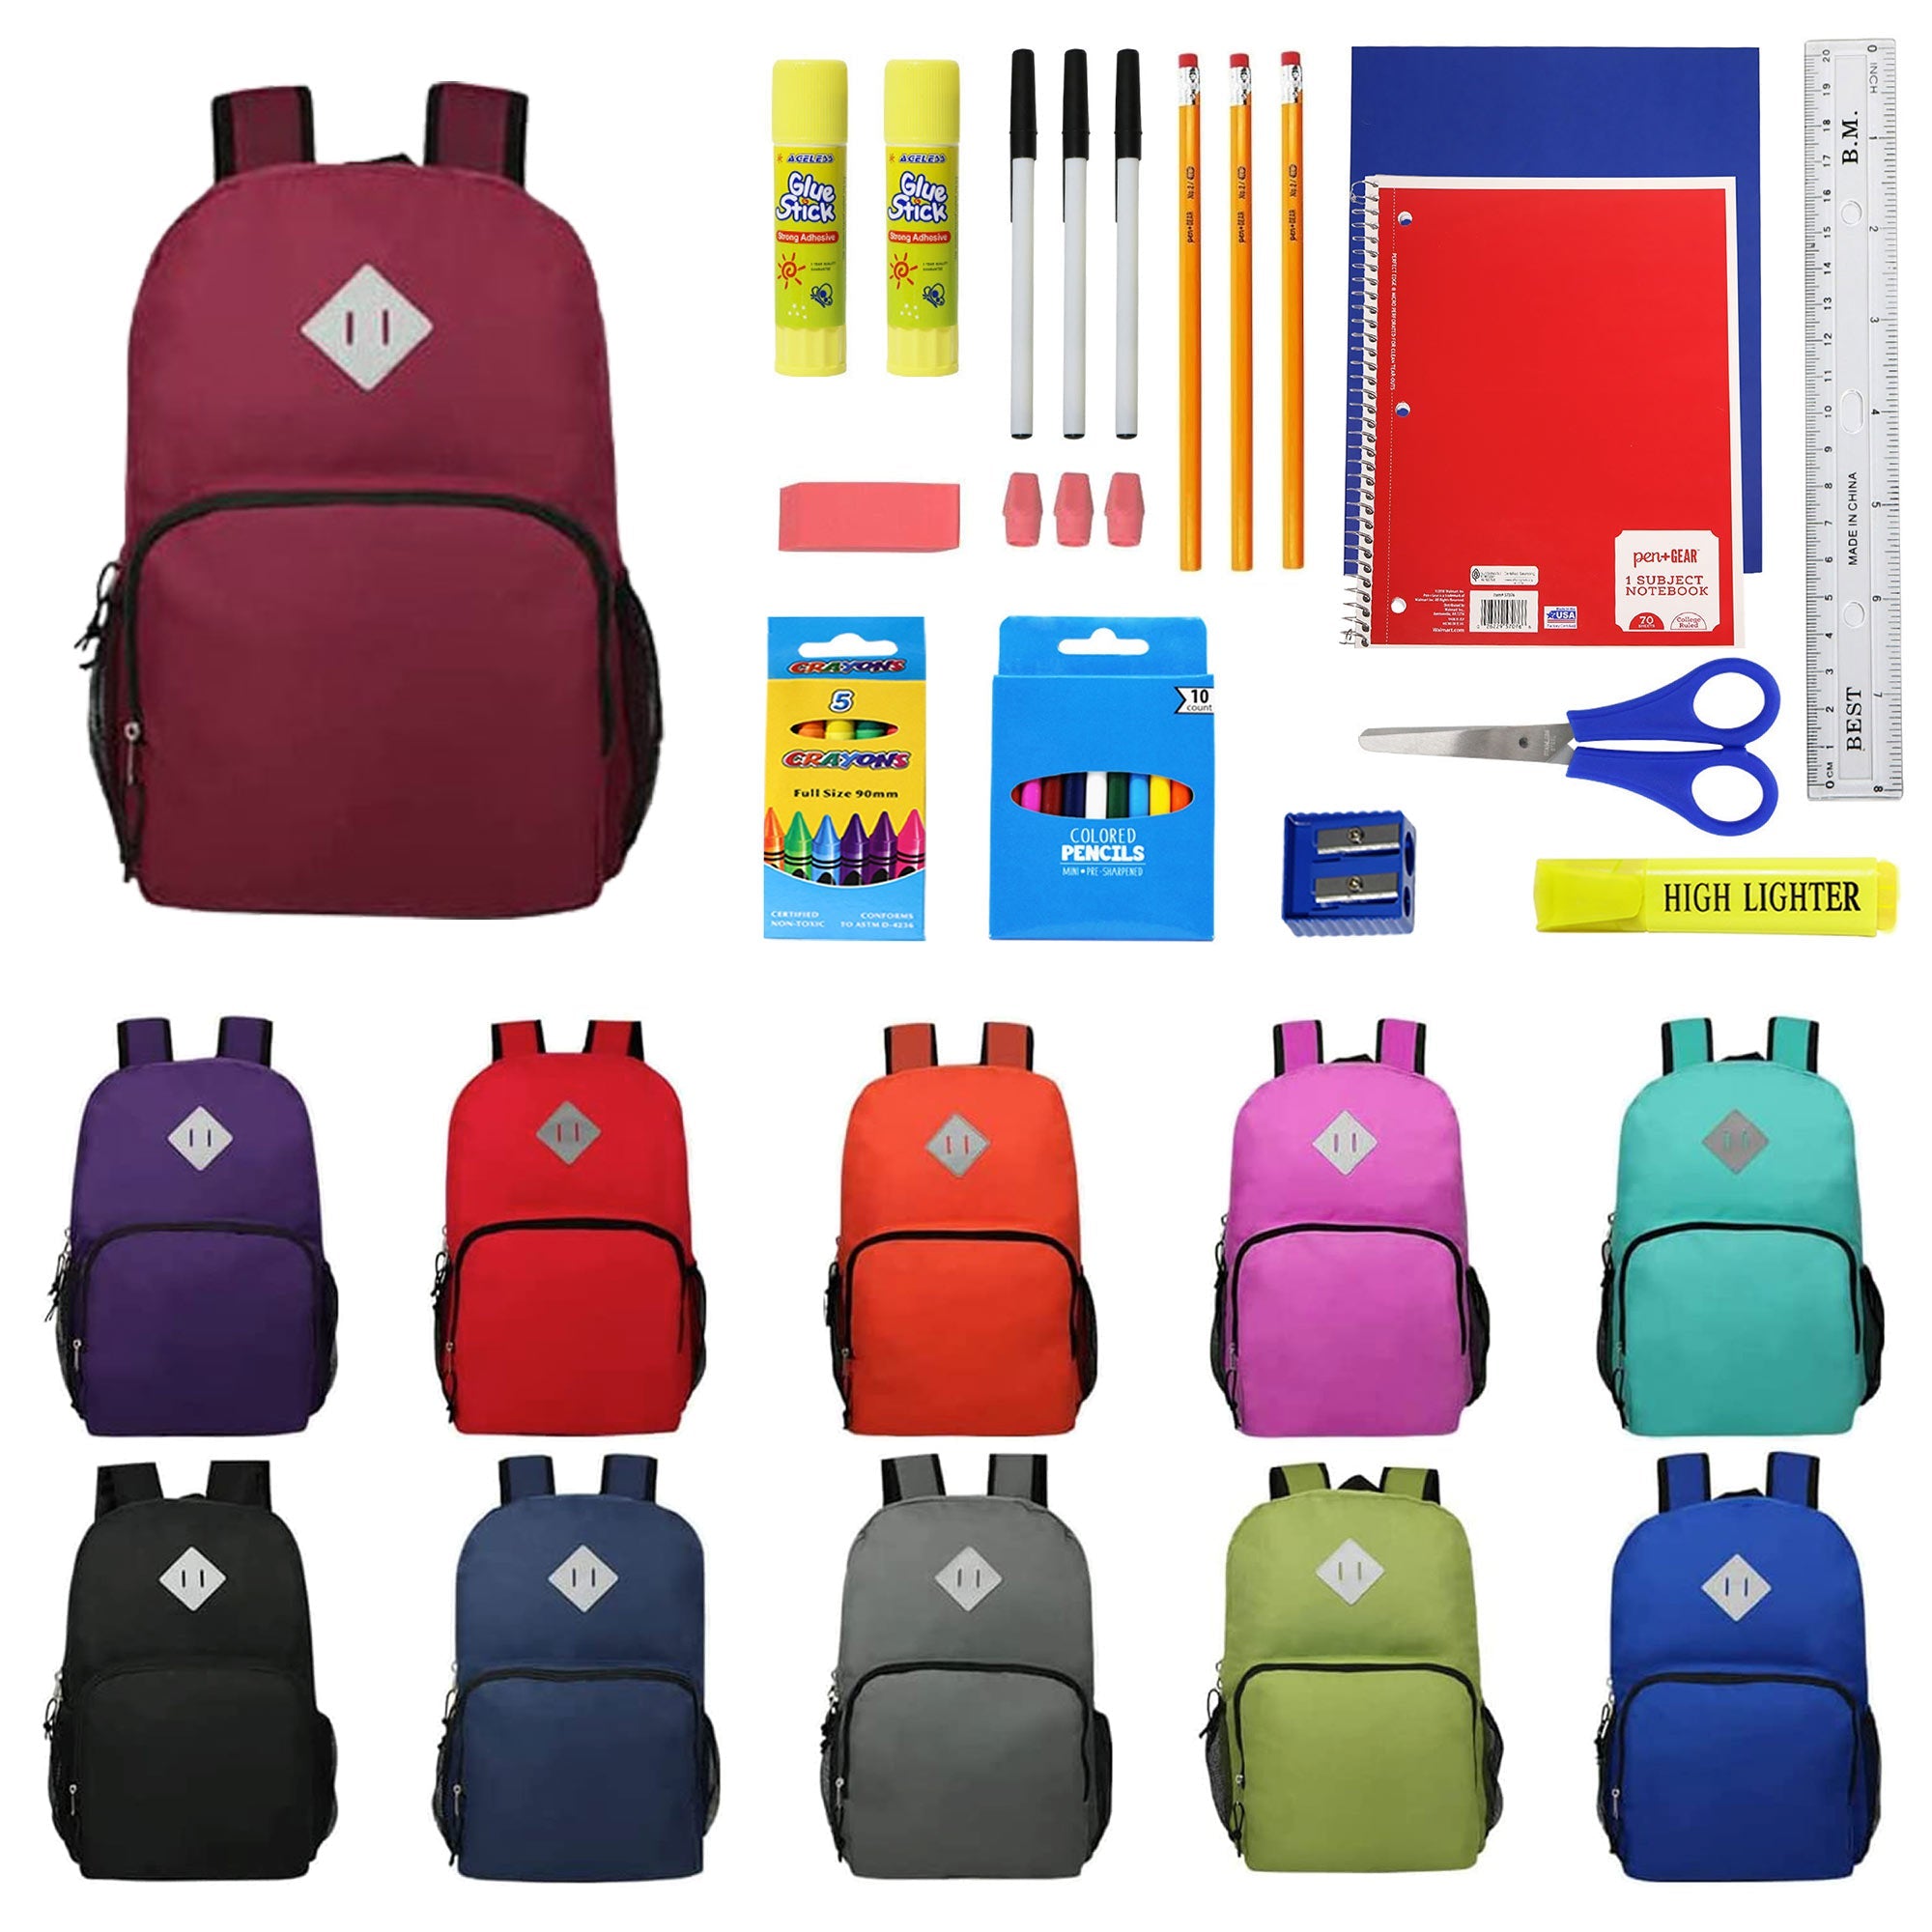 12 Wholesale 18" Deluxe Laptop Backpacks 12 Bulk School Supply Kits of Your Choice